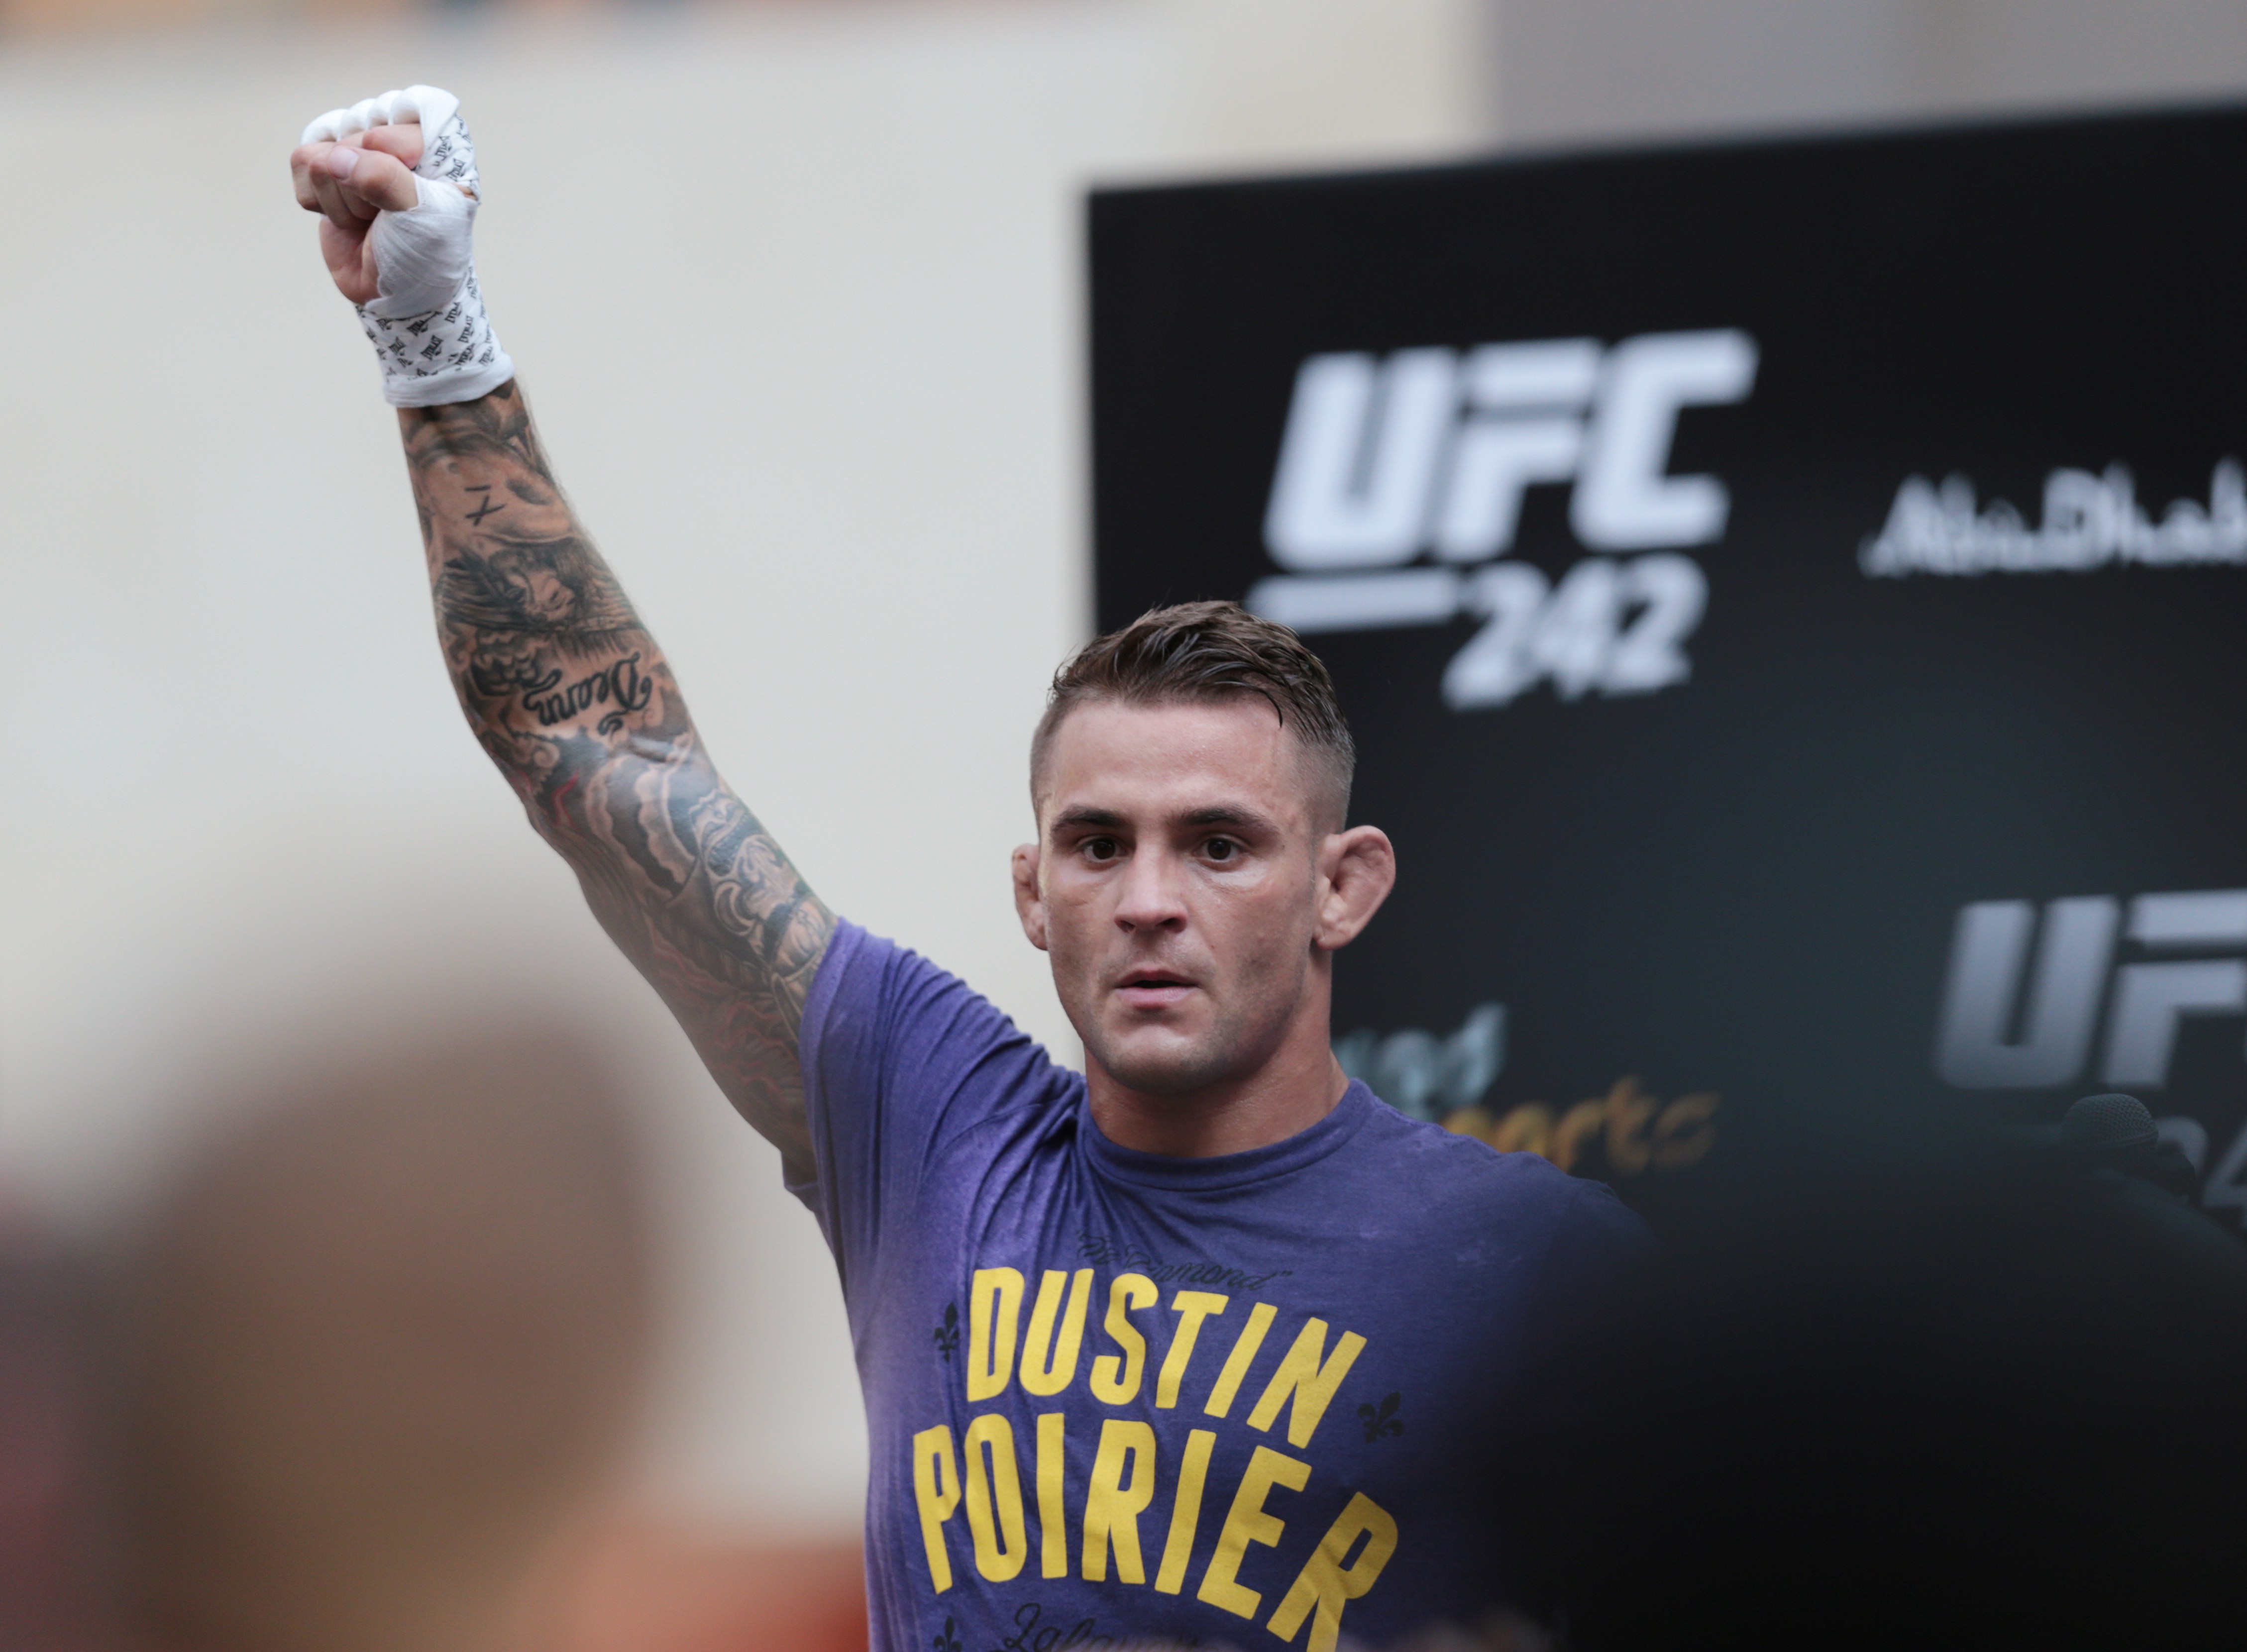 Dustin Poirier trains ahead of his lightweight title unification fight against Khabib Nurmagomedov in 2019. Photo: Reuters